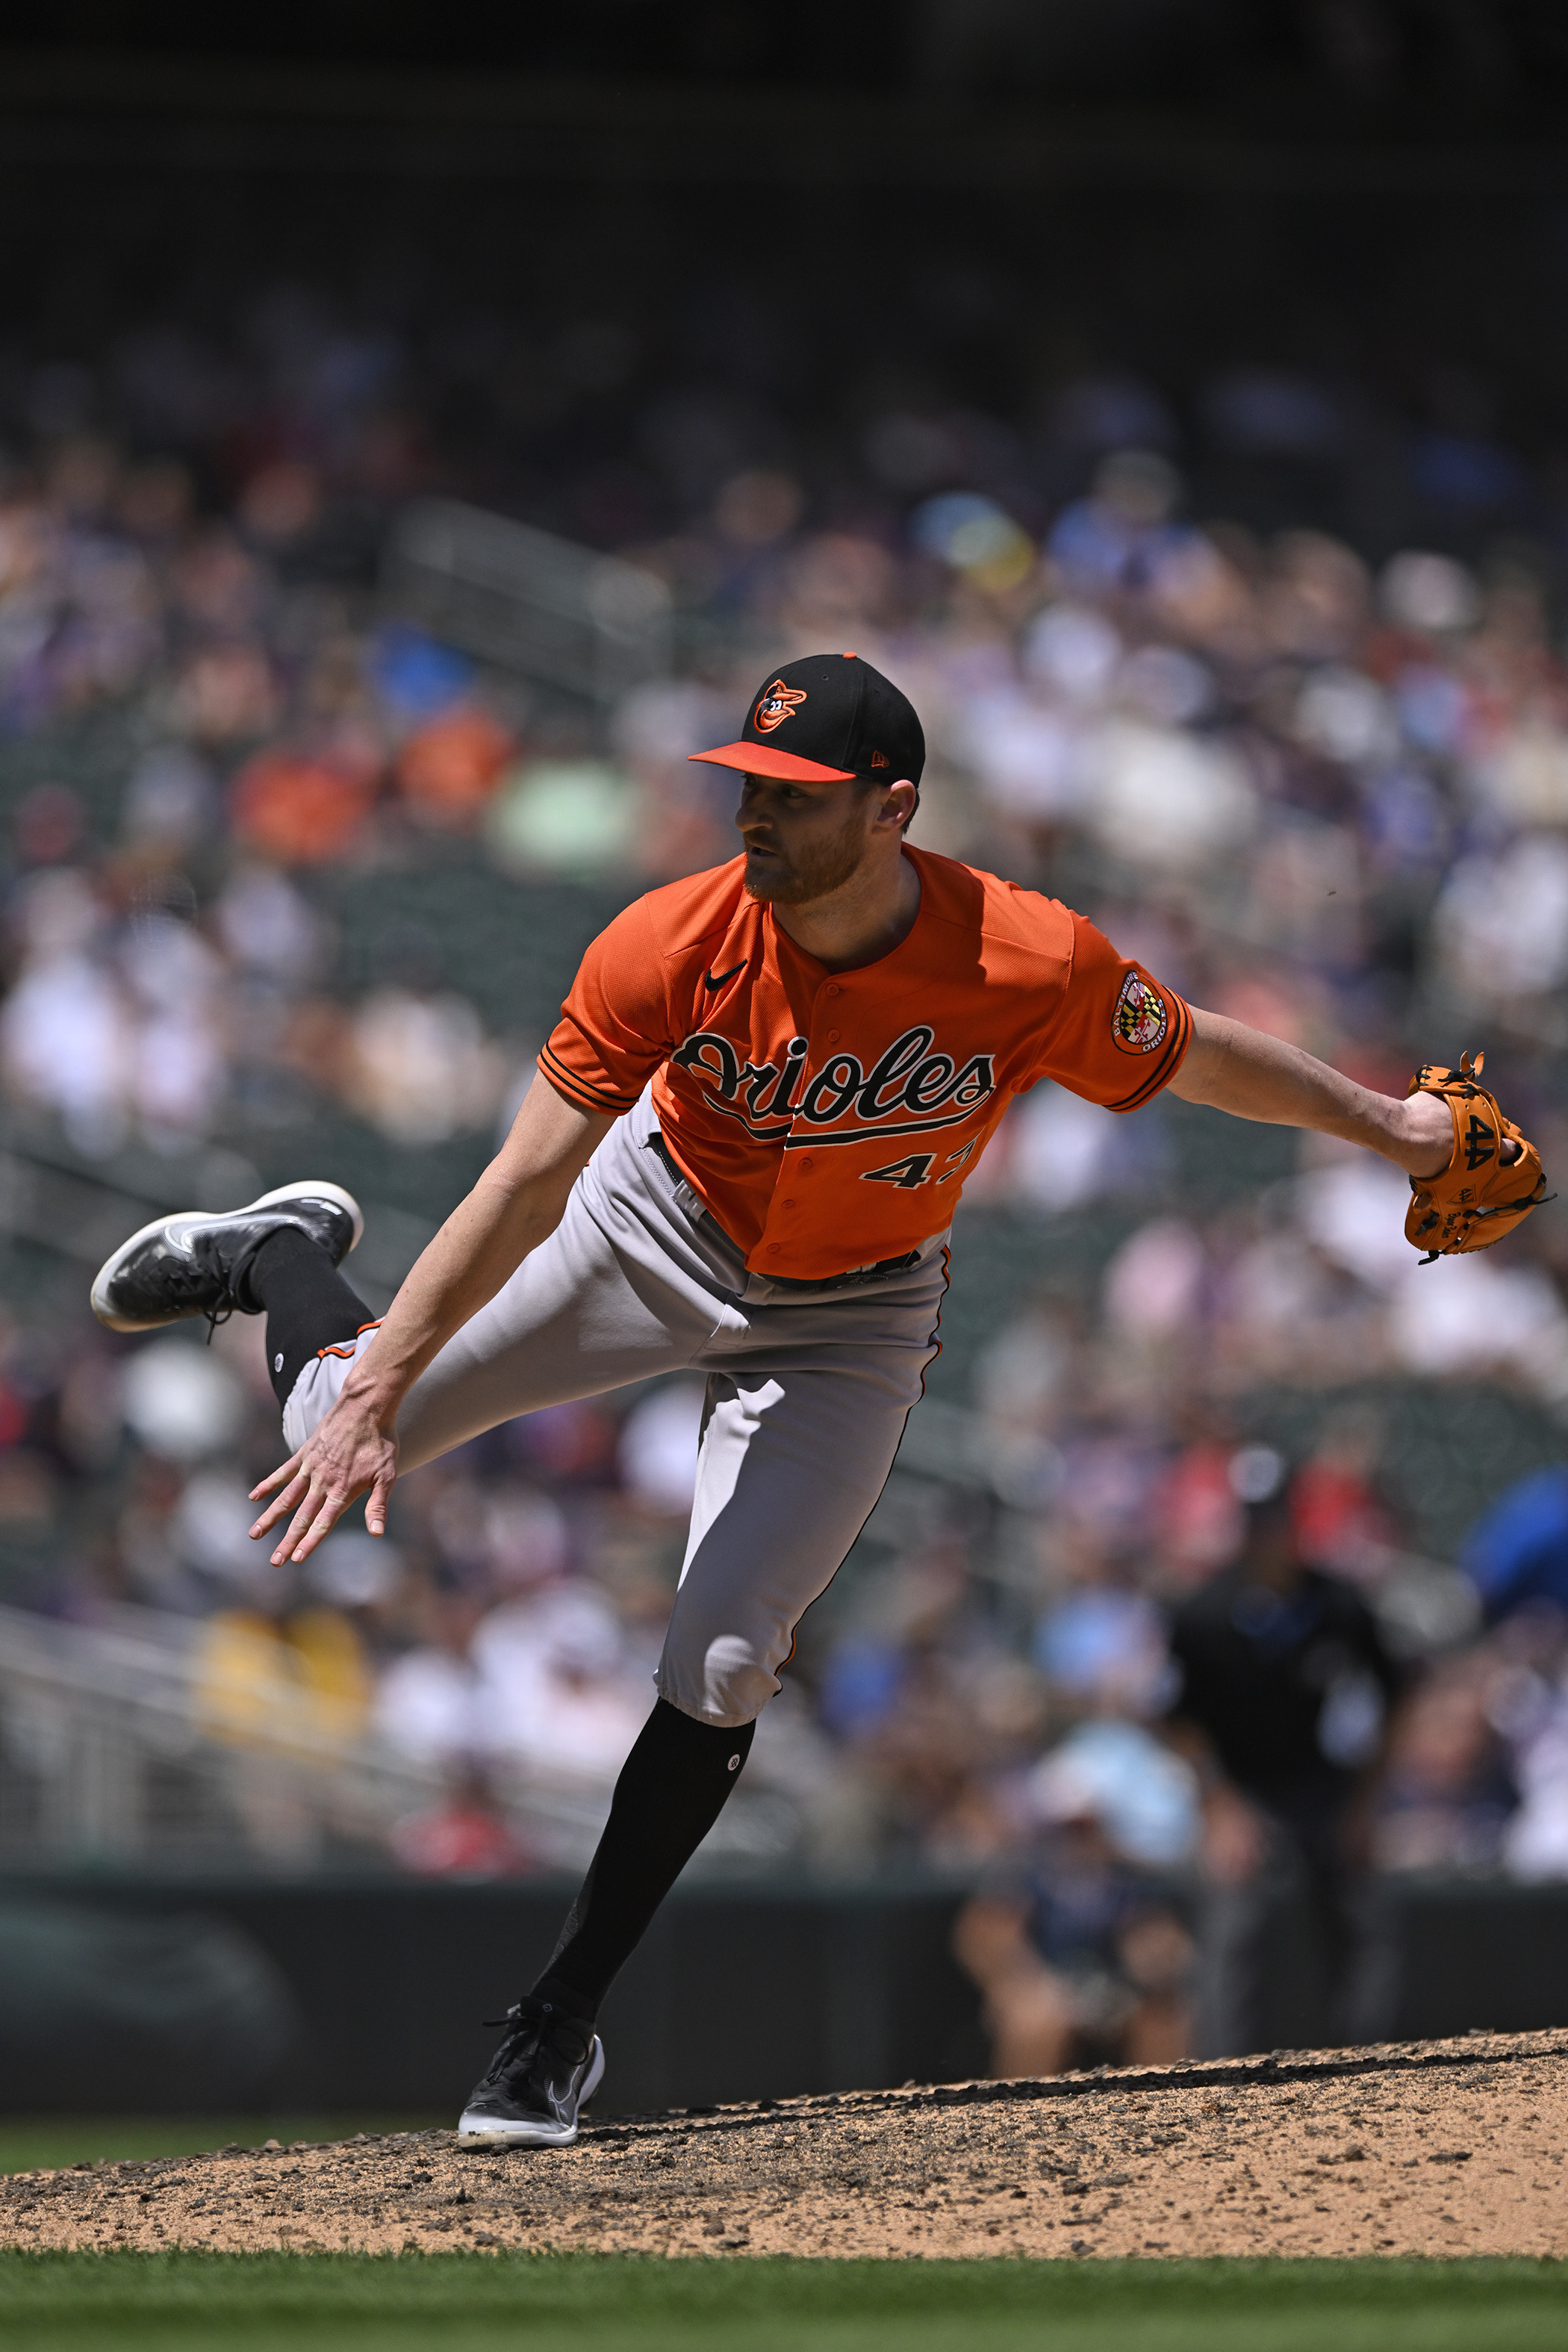 Six-run inning enough for O's to down Twins, extend streak